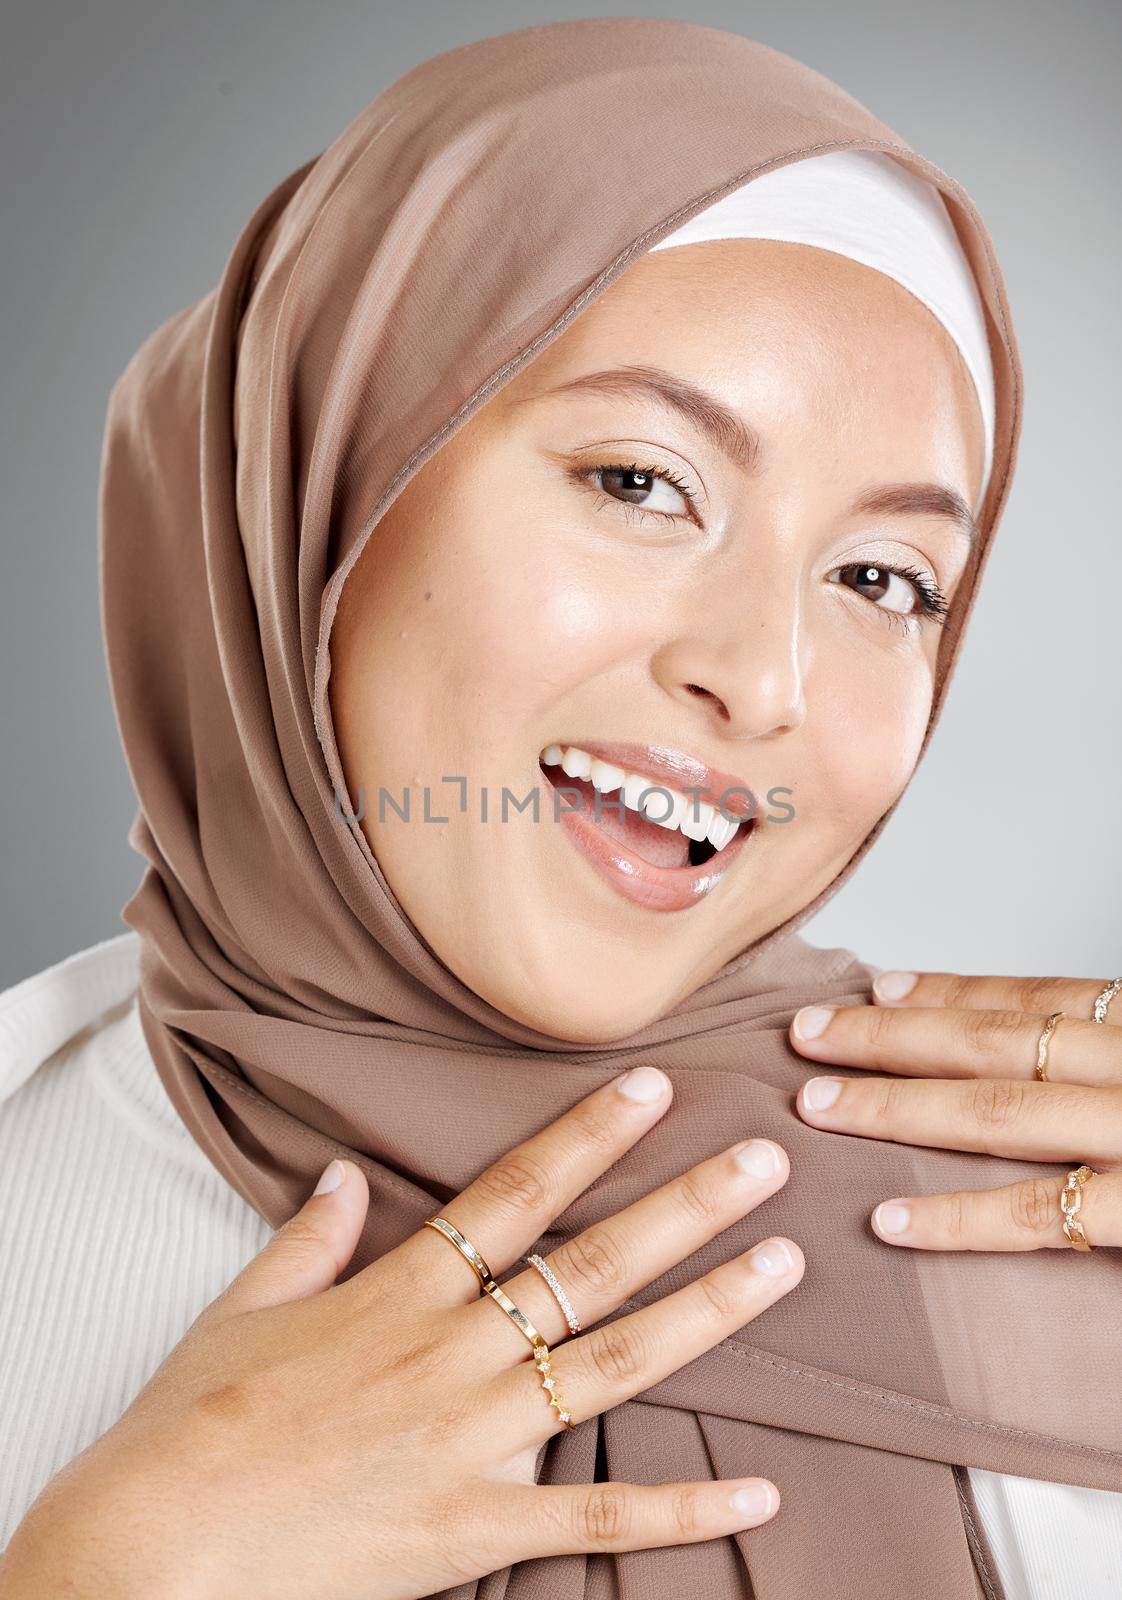 Studio portrait of beautiful and modest muslim woman isolated against a grey background. Young woman wearing a hijab or headscarf showing traditional arab modesty while smiling and looking at camera.